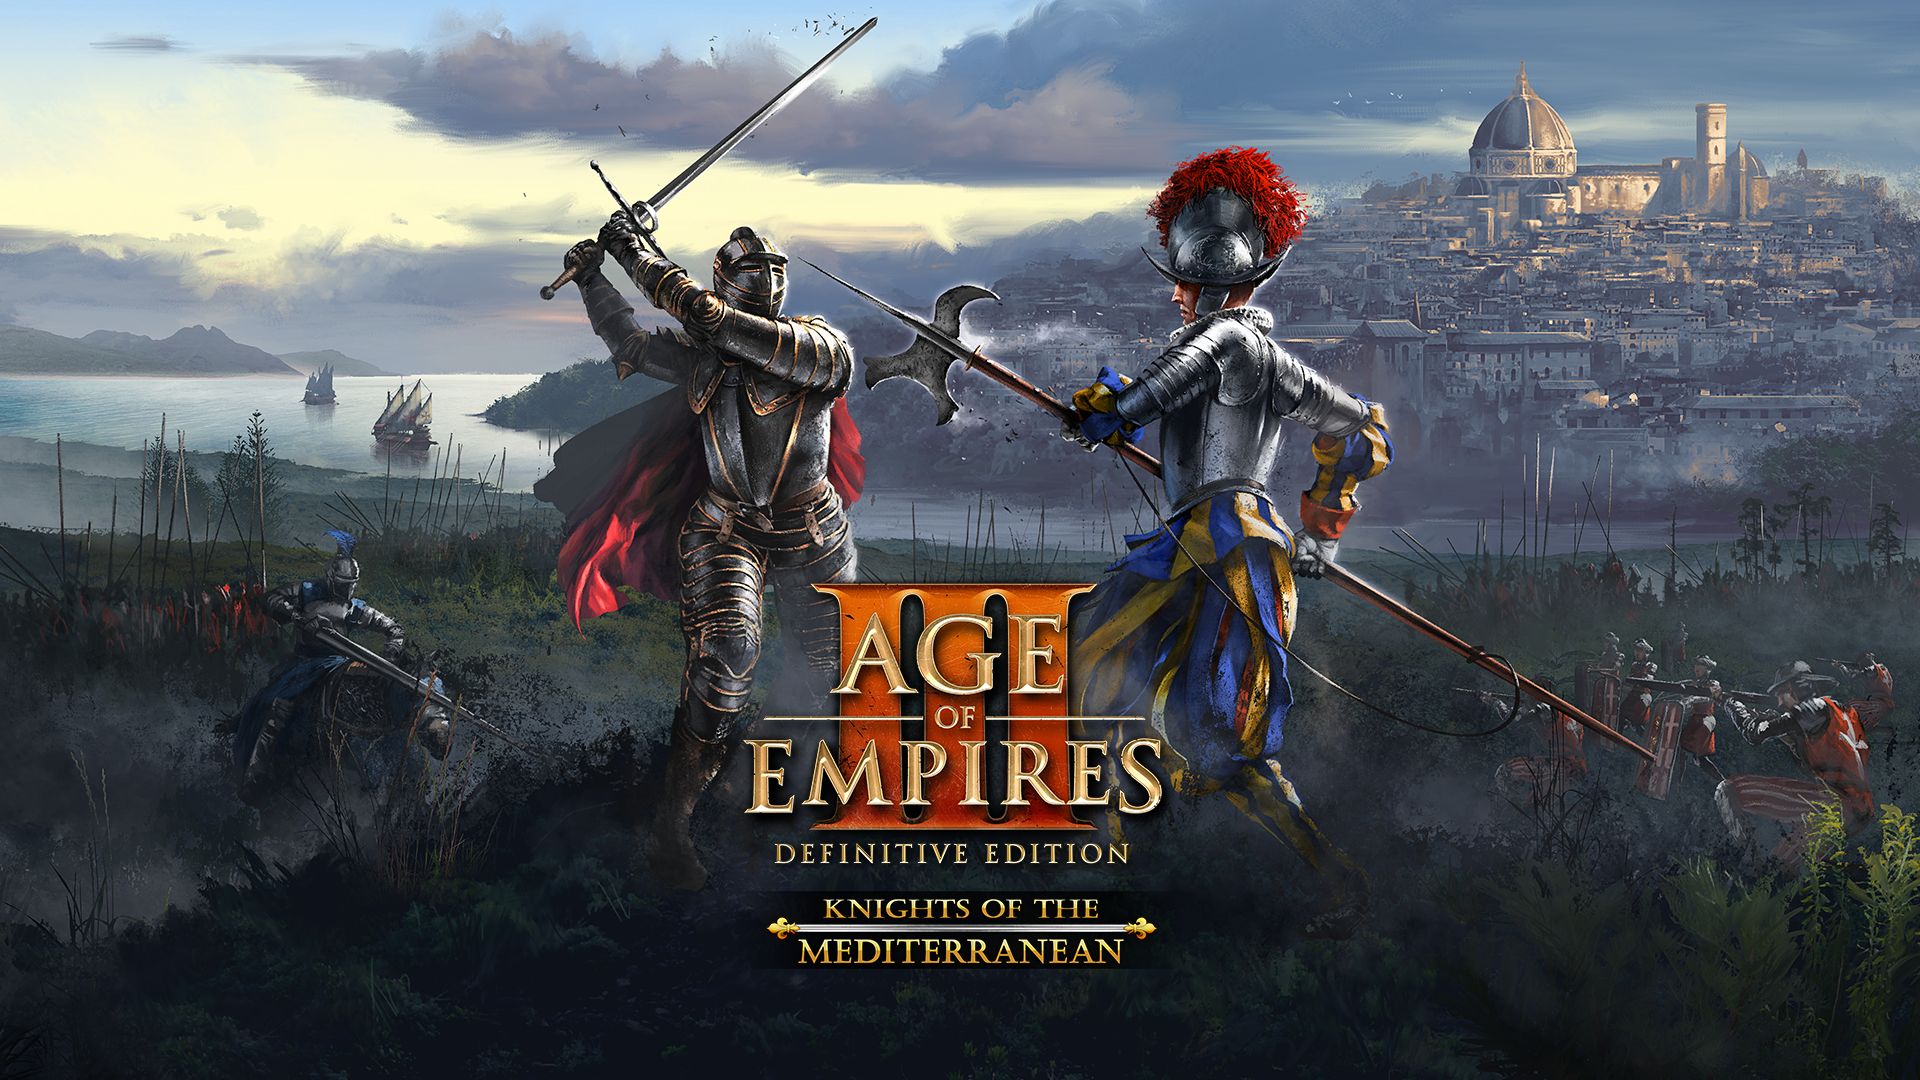 Video For Age of Empires III: Definitive Edition – Introducing Knights of the Mediterranean